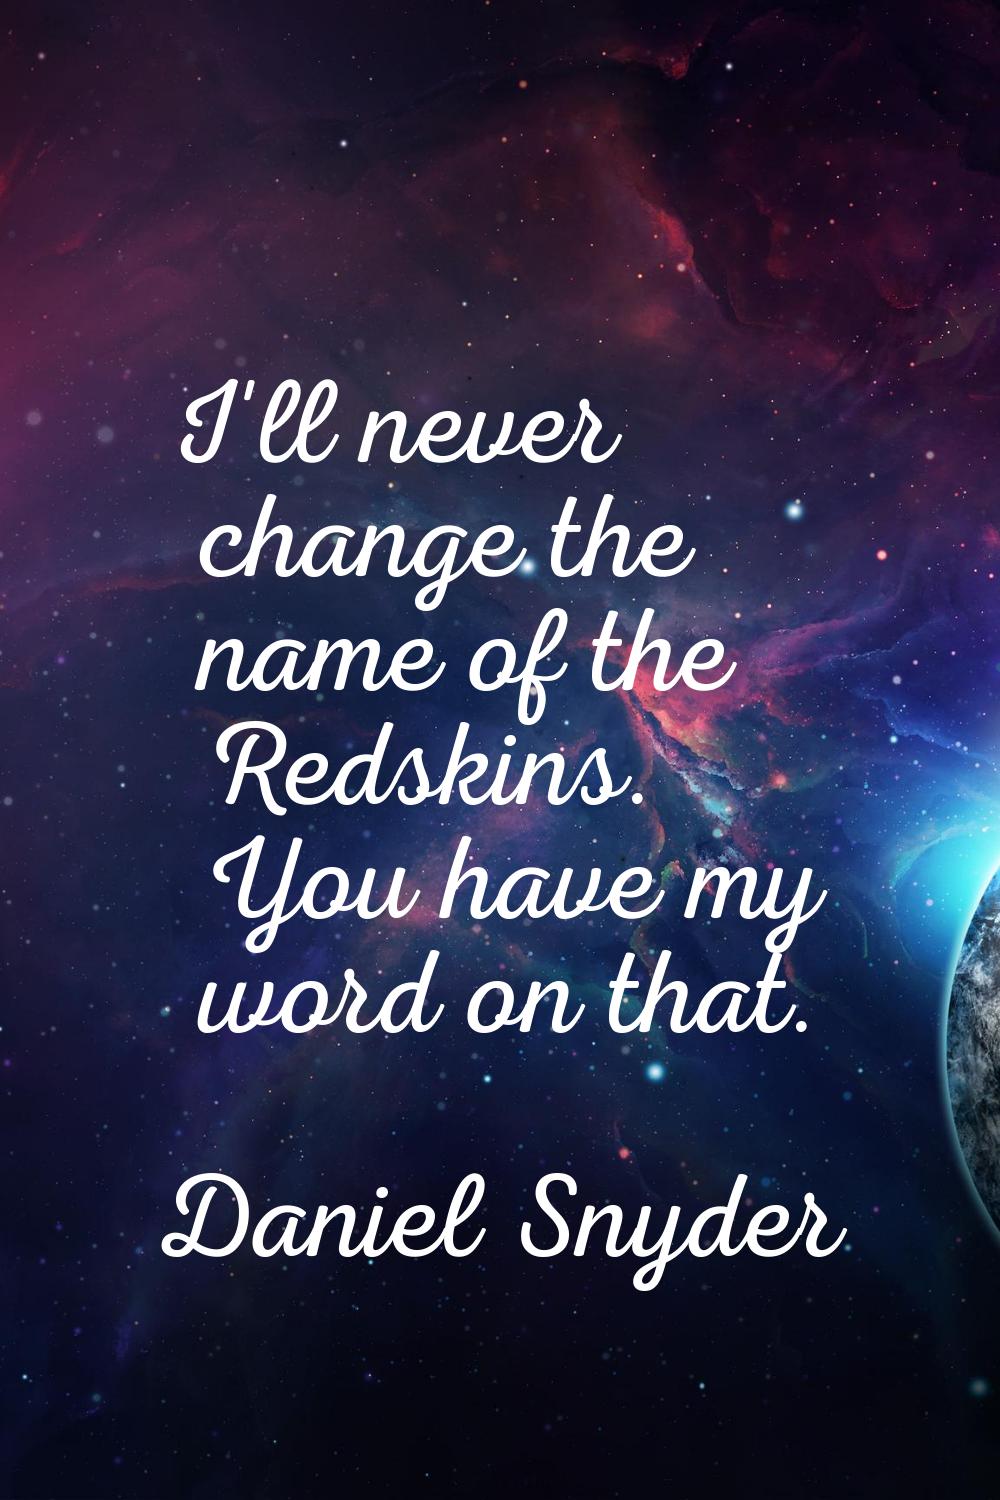 I'll never change the name of the Redskins. You have my word on that.